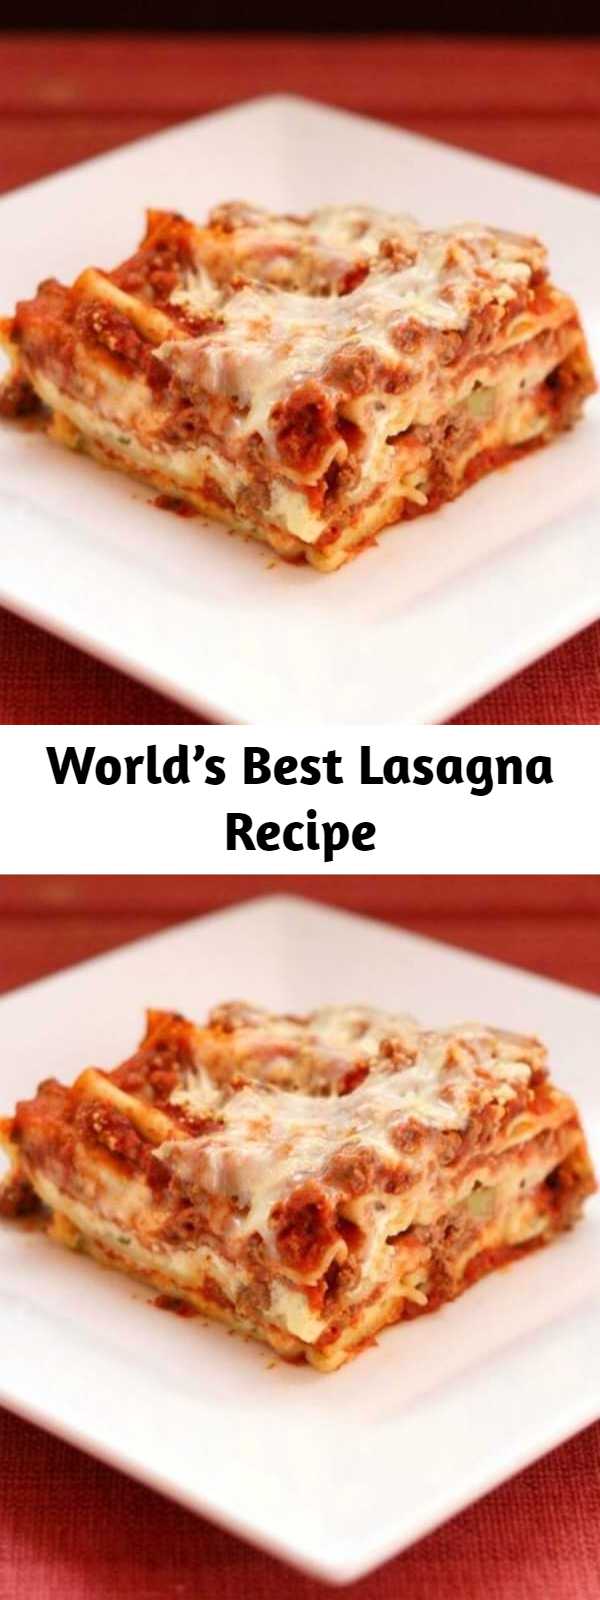 World’s Best Lasagna Recipe - Just the World's Best Lasagna recipe. The ultimate Italian comfort food with layers of pasta, hearty meat cause, creamy ricotta cheese and gooey mozzarella. #lasagna #comfortfood